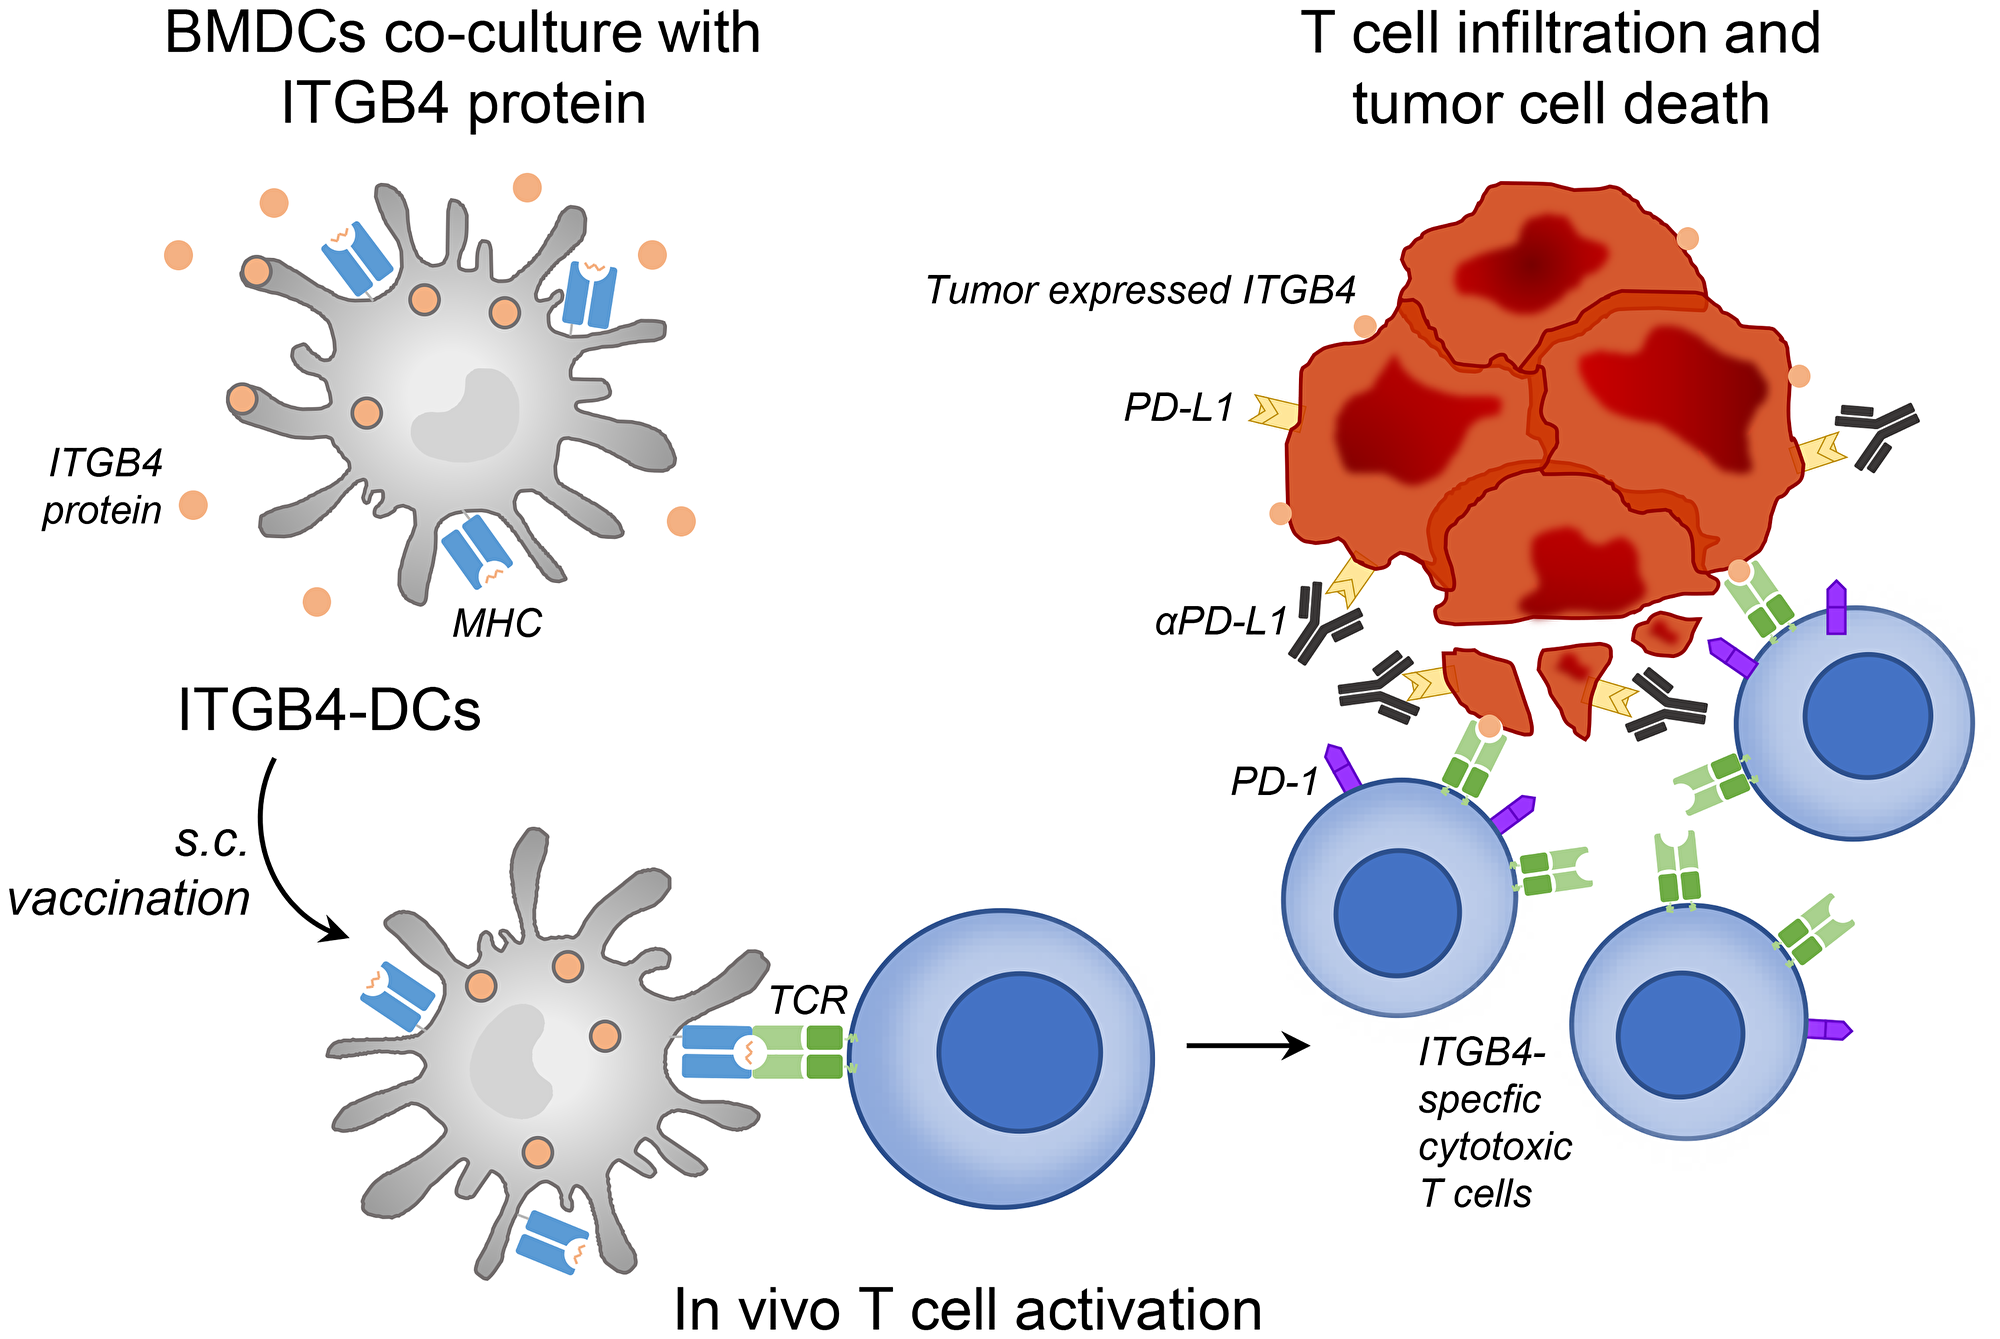 ITGB4-DC vaccine primes ITGB4-specific T cells in vivo, leading to killing of ITGB4 expressing cancer stem cells and differentiated tumor cells which is augmented by anti-PD-L1 administration.